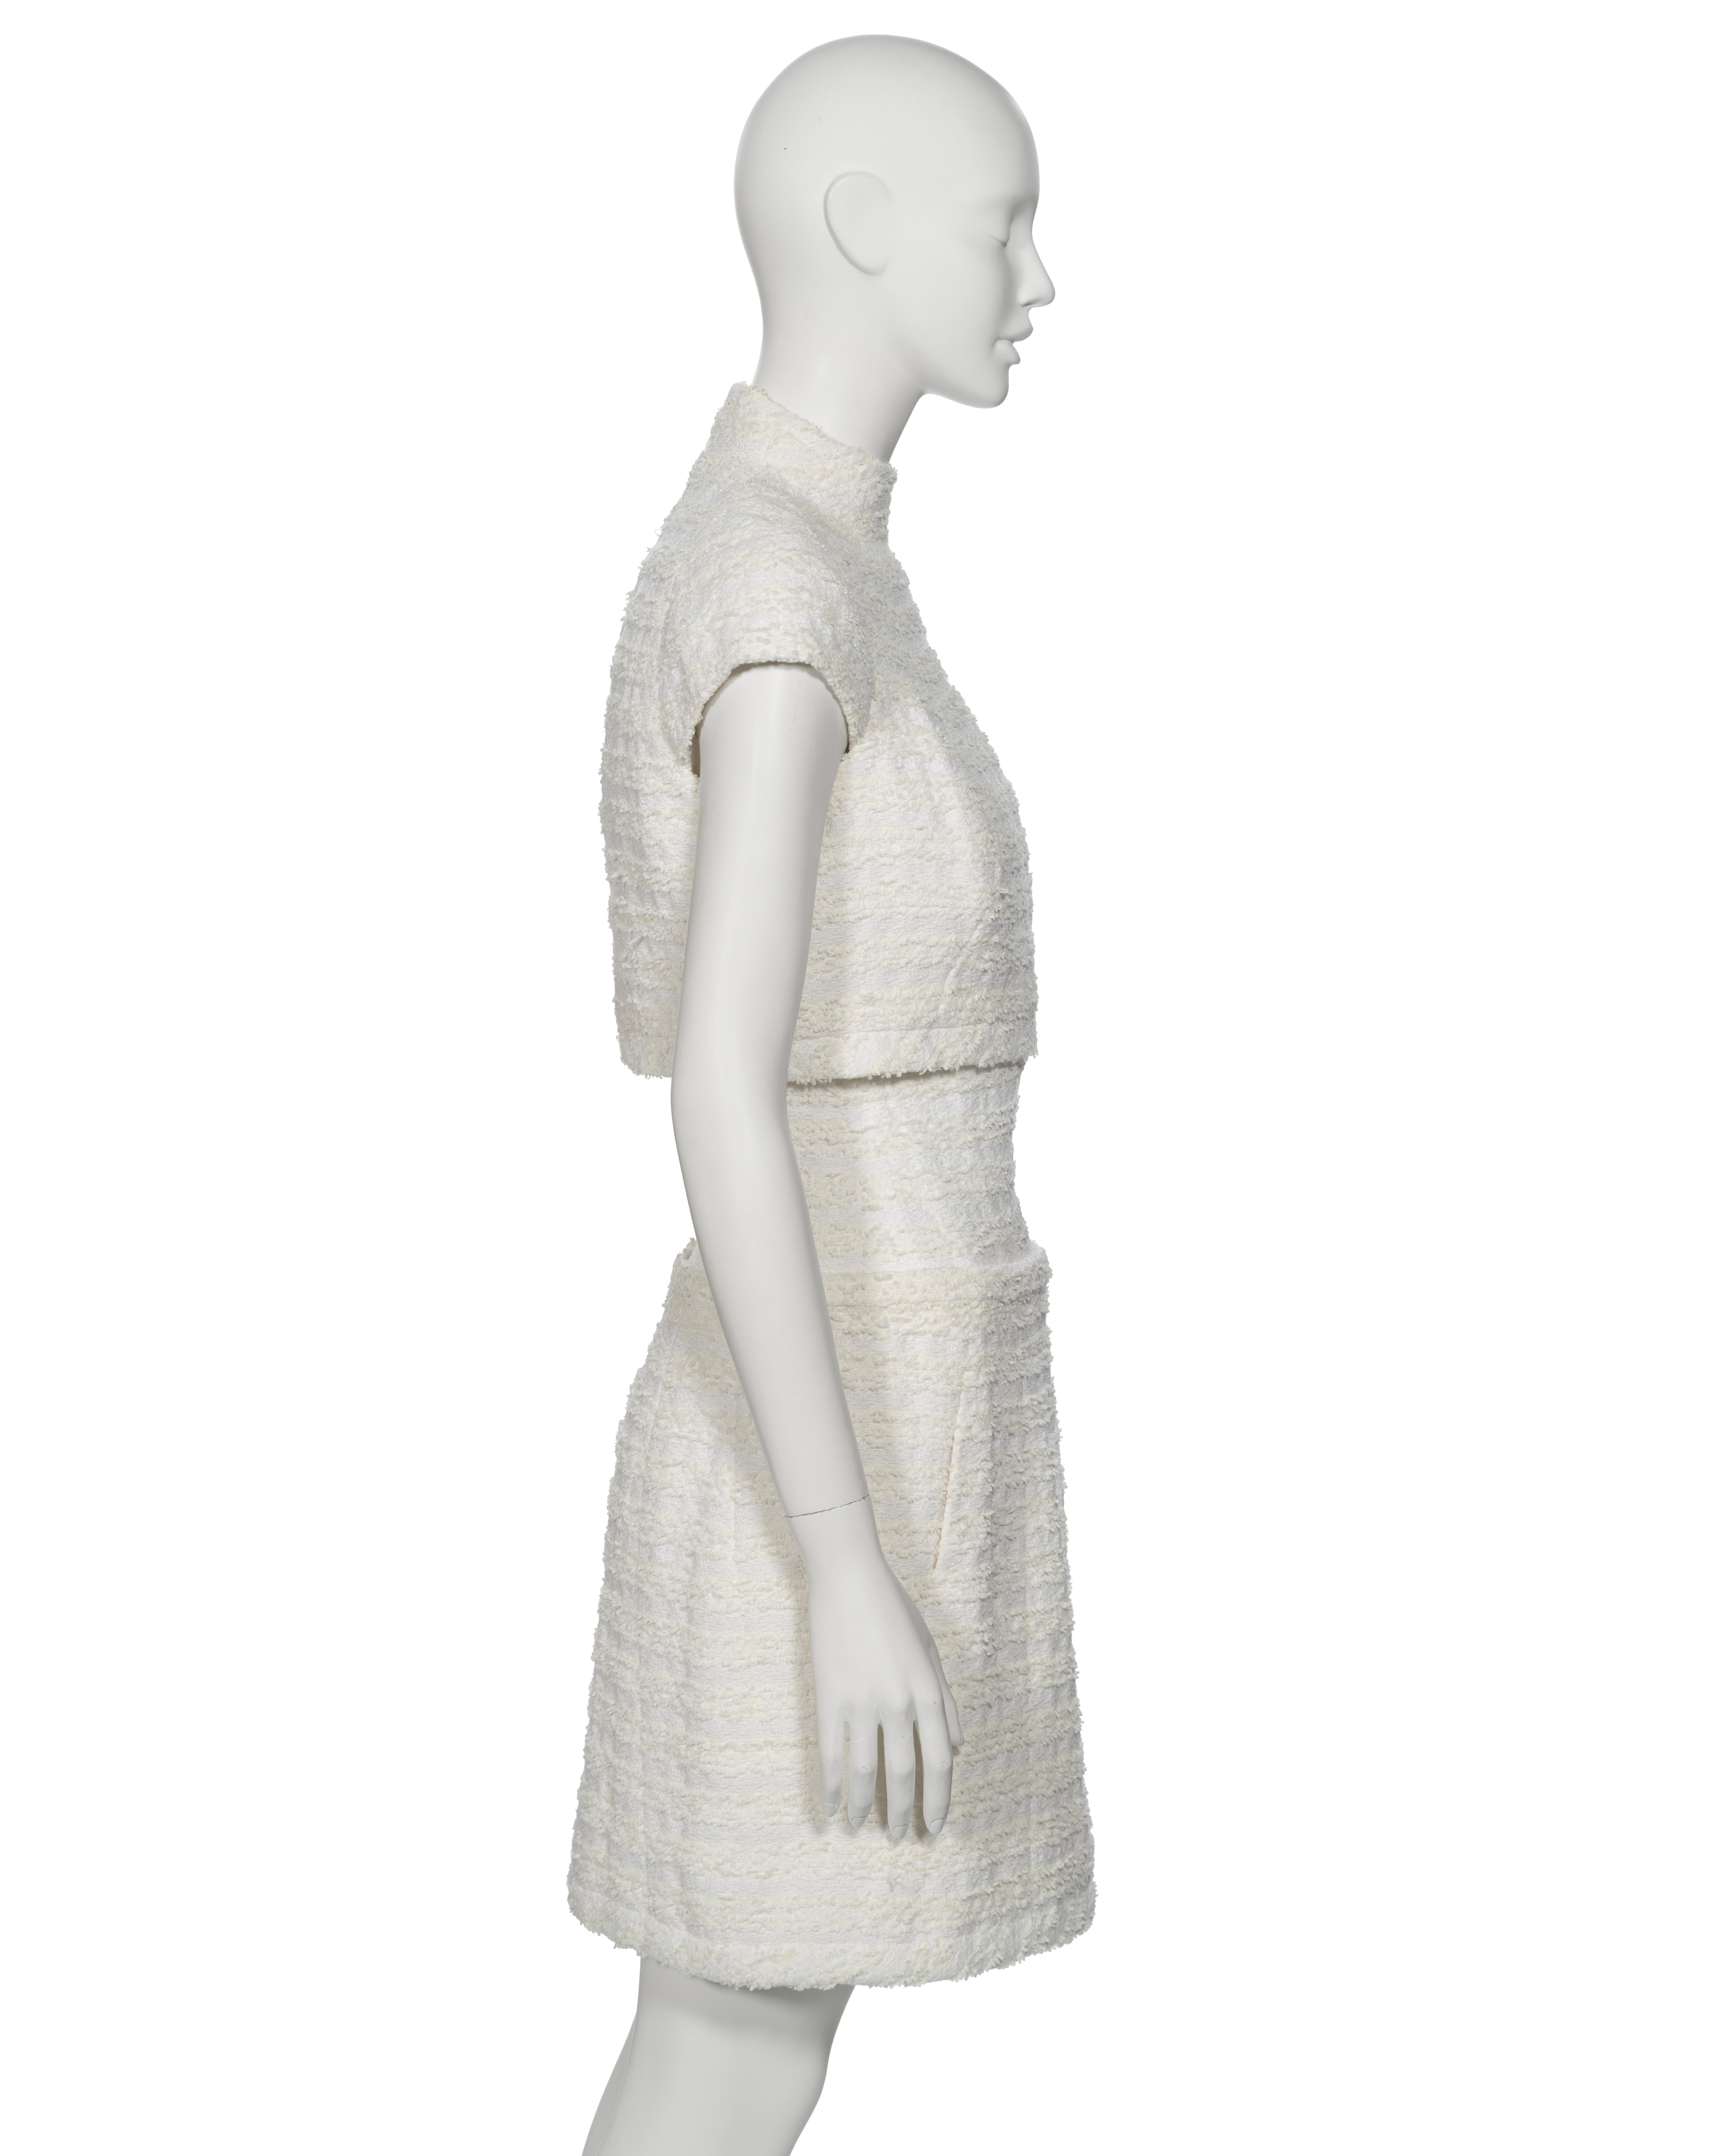 Chanel by Karl Lagerfeld Haute Couture White Bouclé Corseted Skirt Suit, ss 2014 For Sale 4